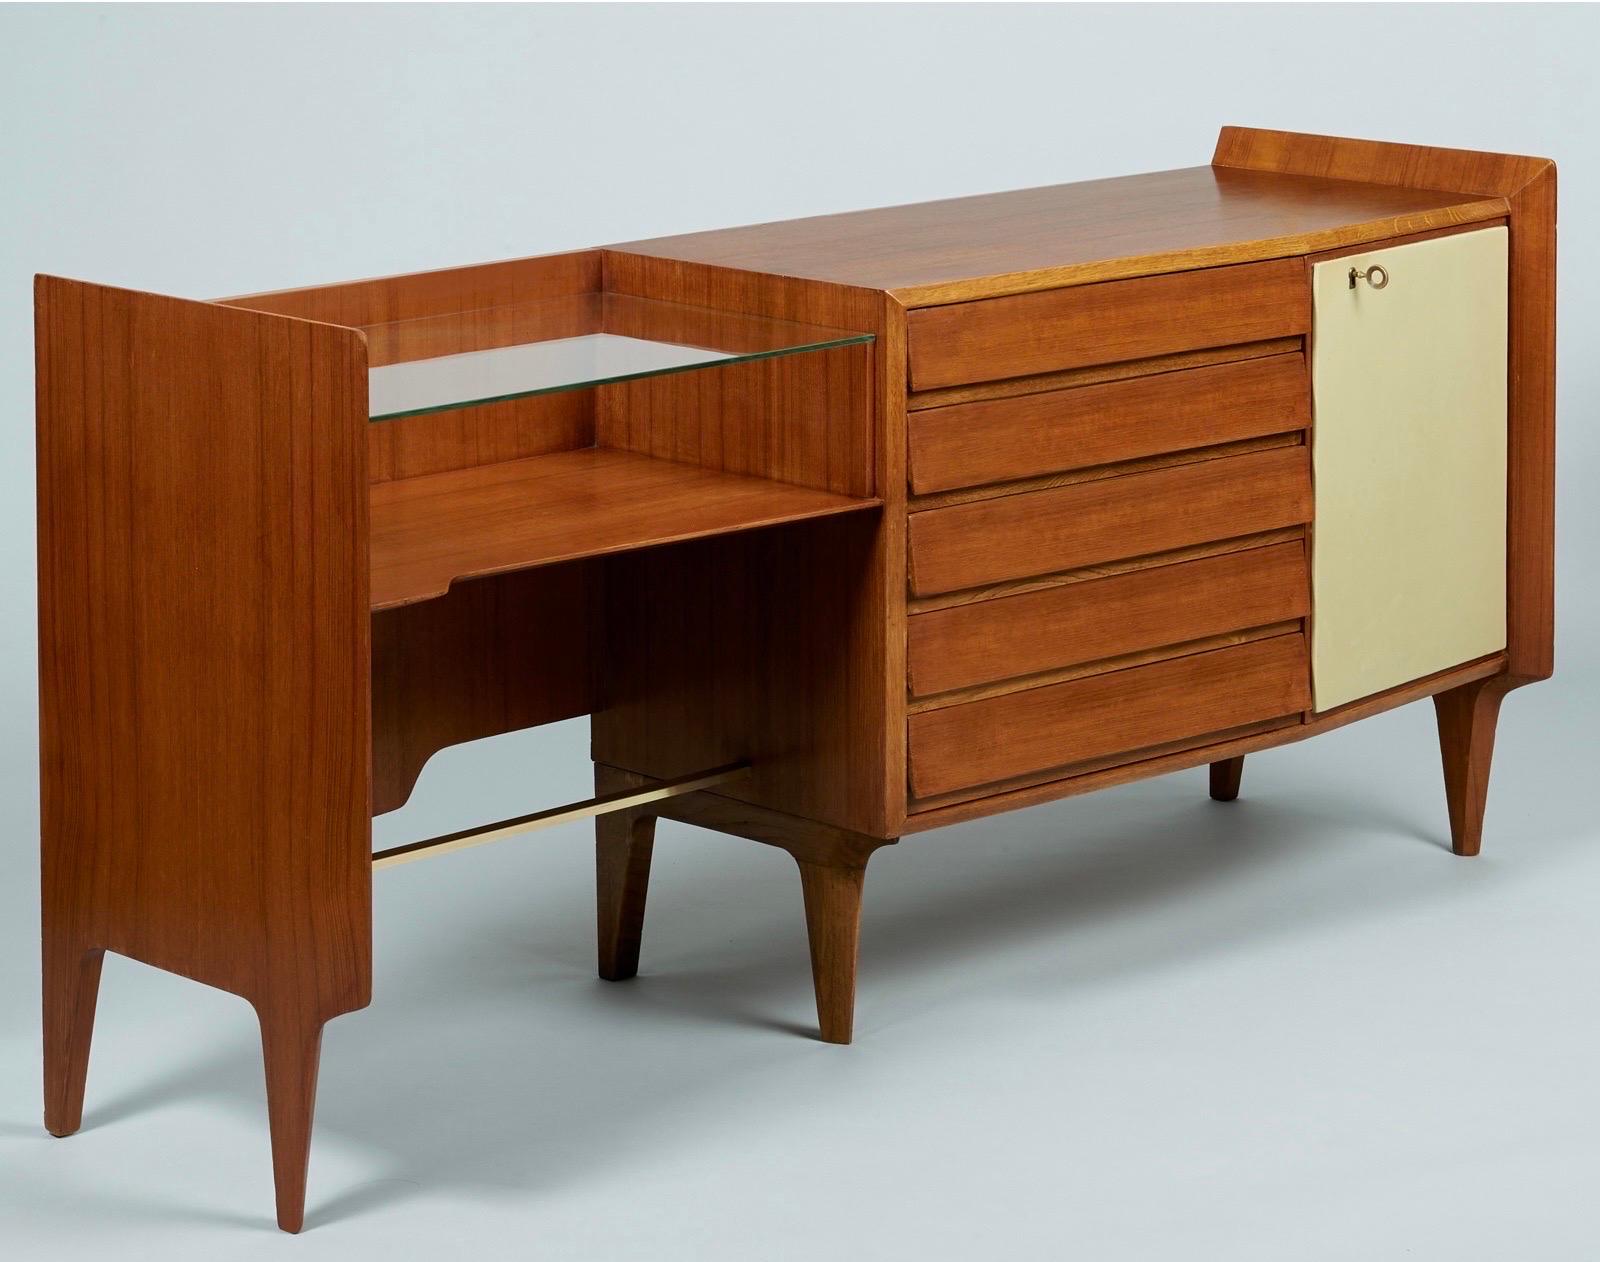 Gio Ponti (1891 - 1979) 

An exceptional and rare asymmetrical credenza by modernist master Gio Ponti, in mahogany with five drawers angled subtly outwards, a glass writing desk, polished brass hardware, and the original cream-colored skai door with